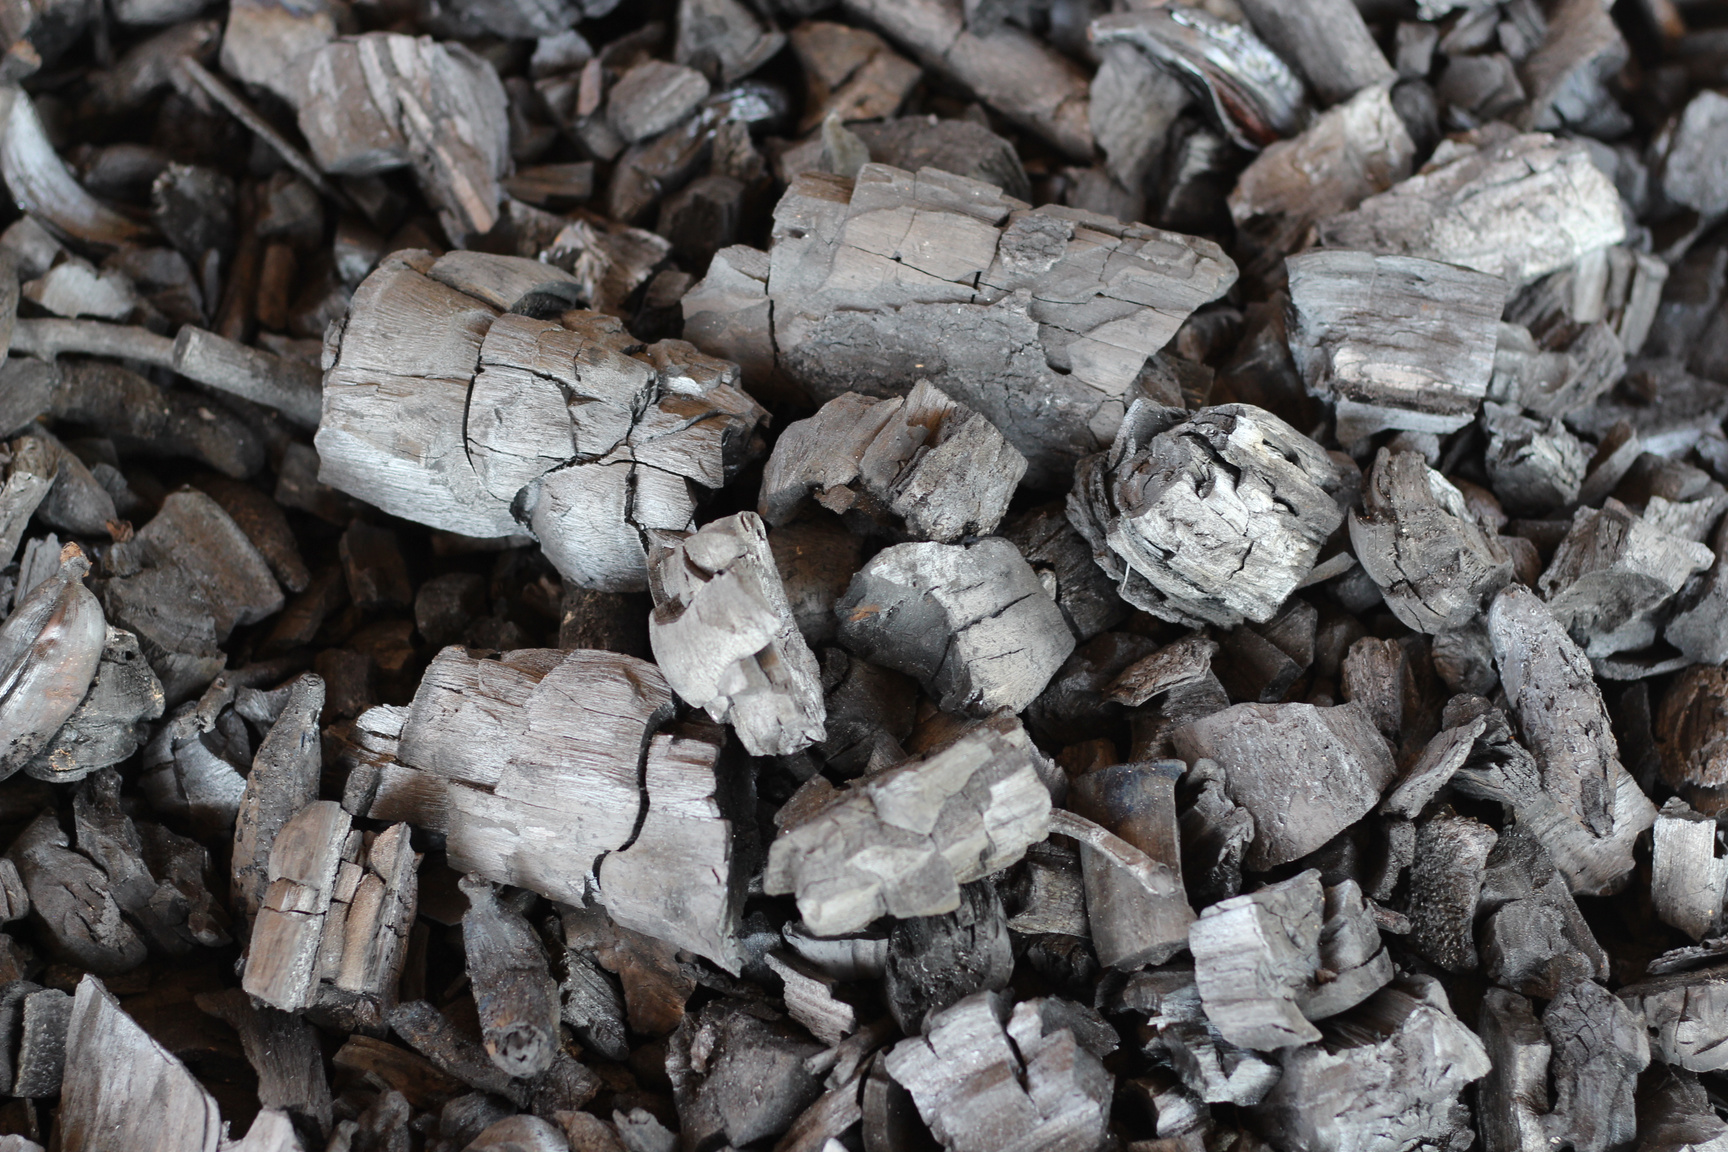 "Biochar" the charcoal using as soil amendment made from agricultural waste.